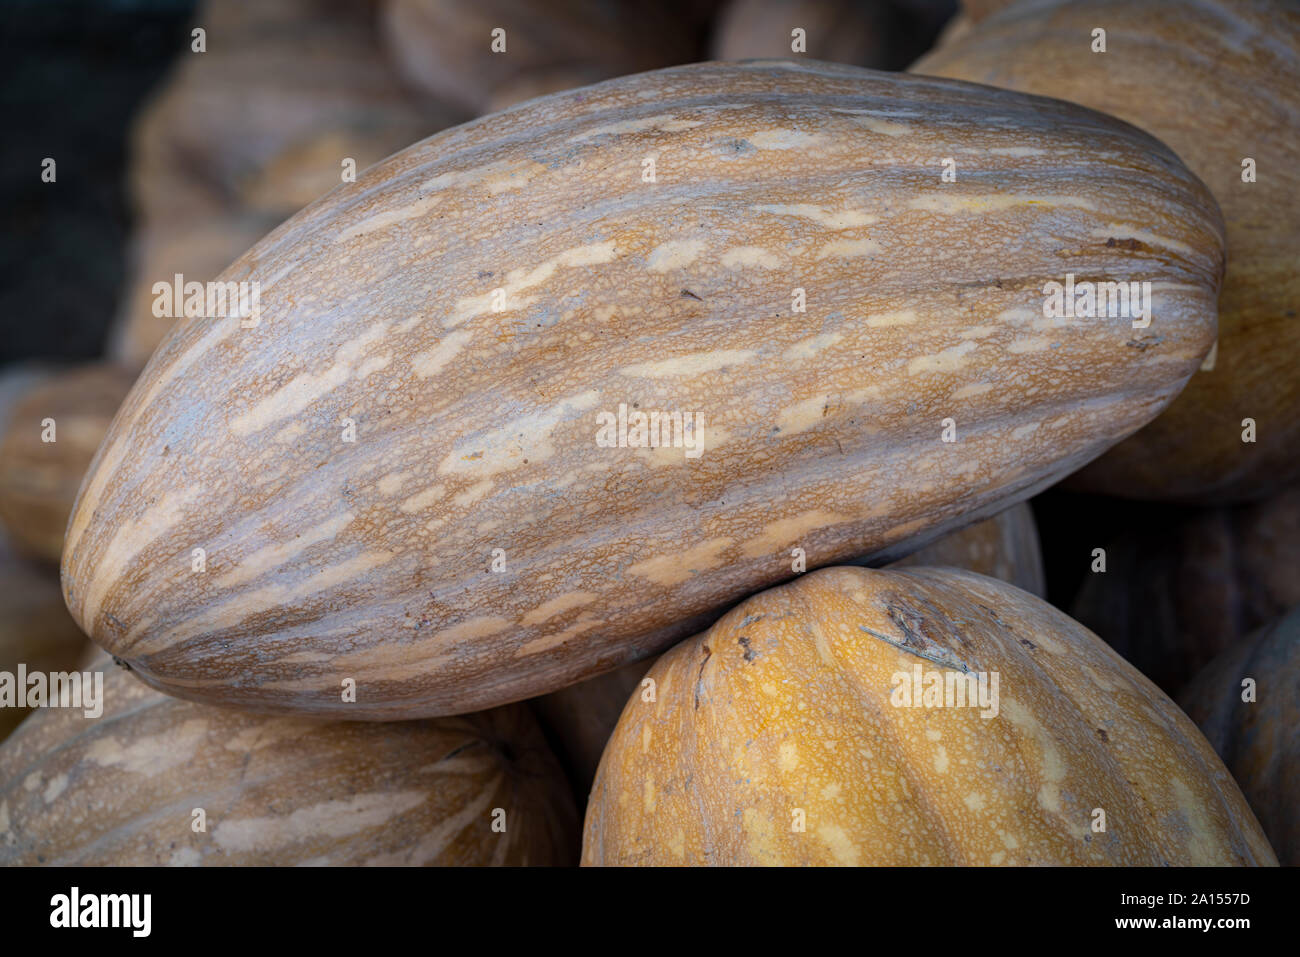 Close up of oval shaped pumpkin Stock Photo